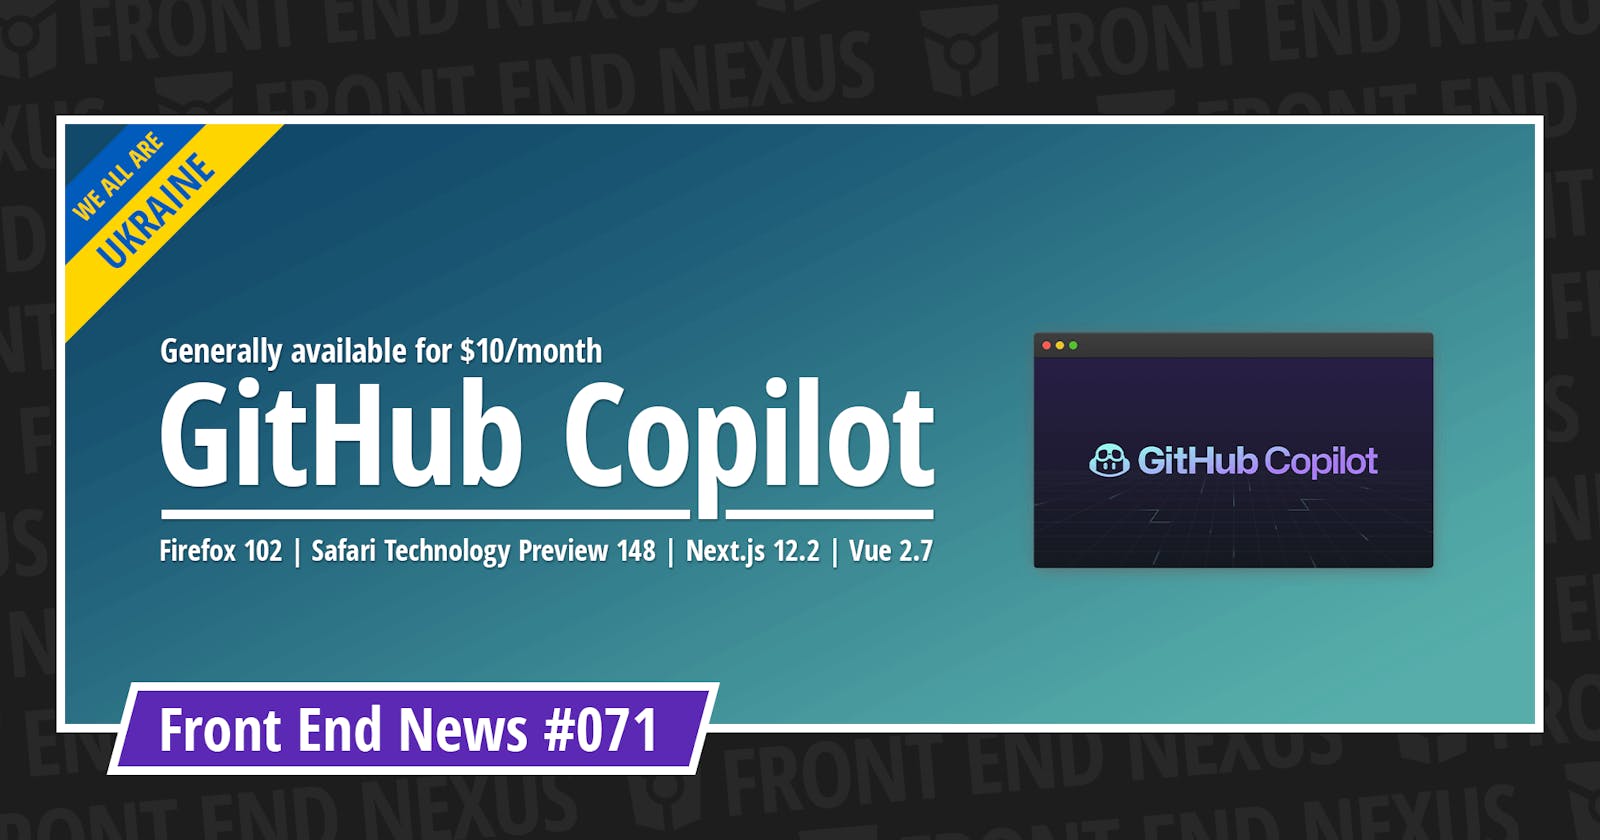 GitHub Copilot goes commercial, Firefox 102, Safari Technology Preview 148, Next.js v12.2.0, Vue 2.7, and more | Front End News #071